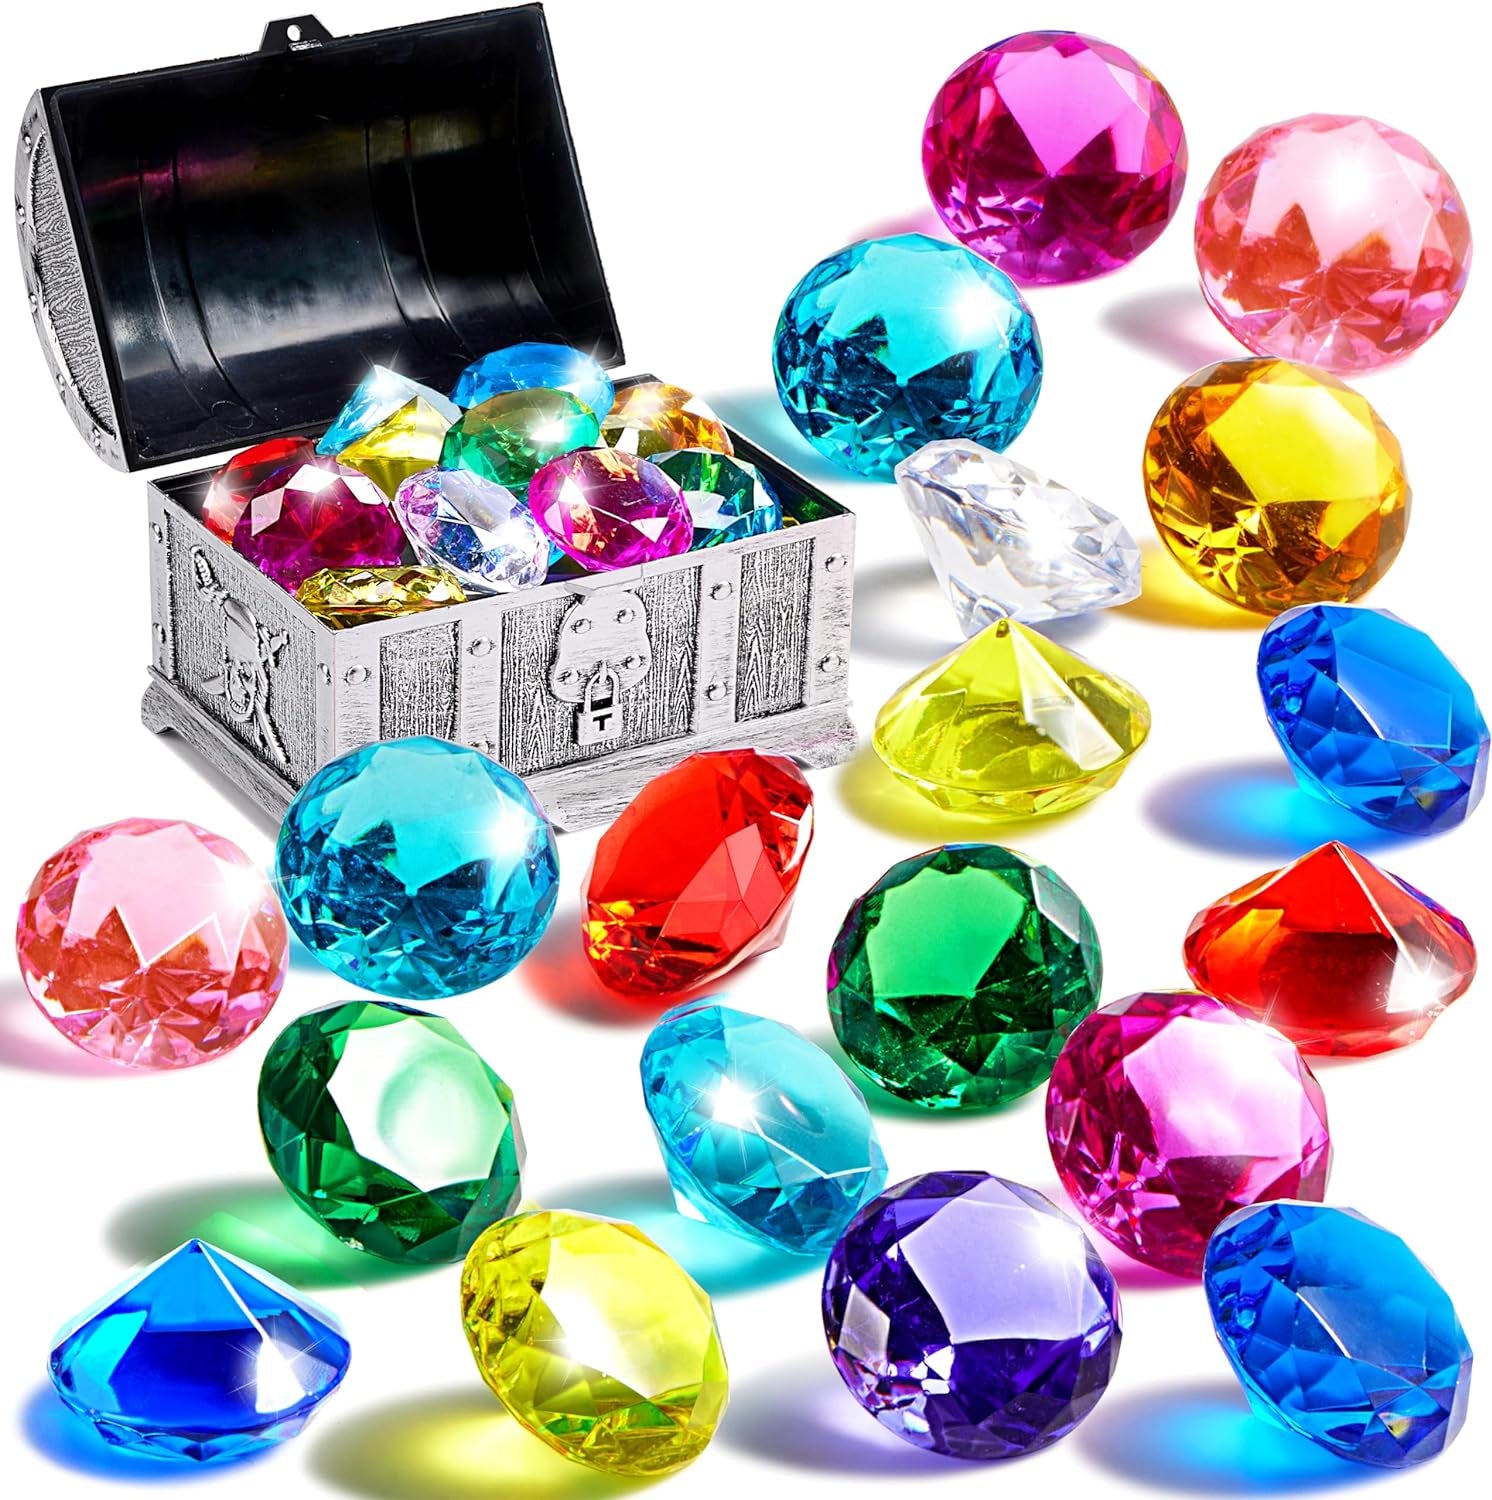 Diving Gems Pool Toys, 16 Big Colorful Diamond with Pirate Treasure Chest, Swim Dive Toy for Kids Underwater Gemstone Swimming Training Gift Water Toys Pool Games（Gold）